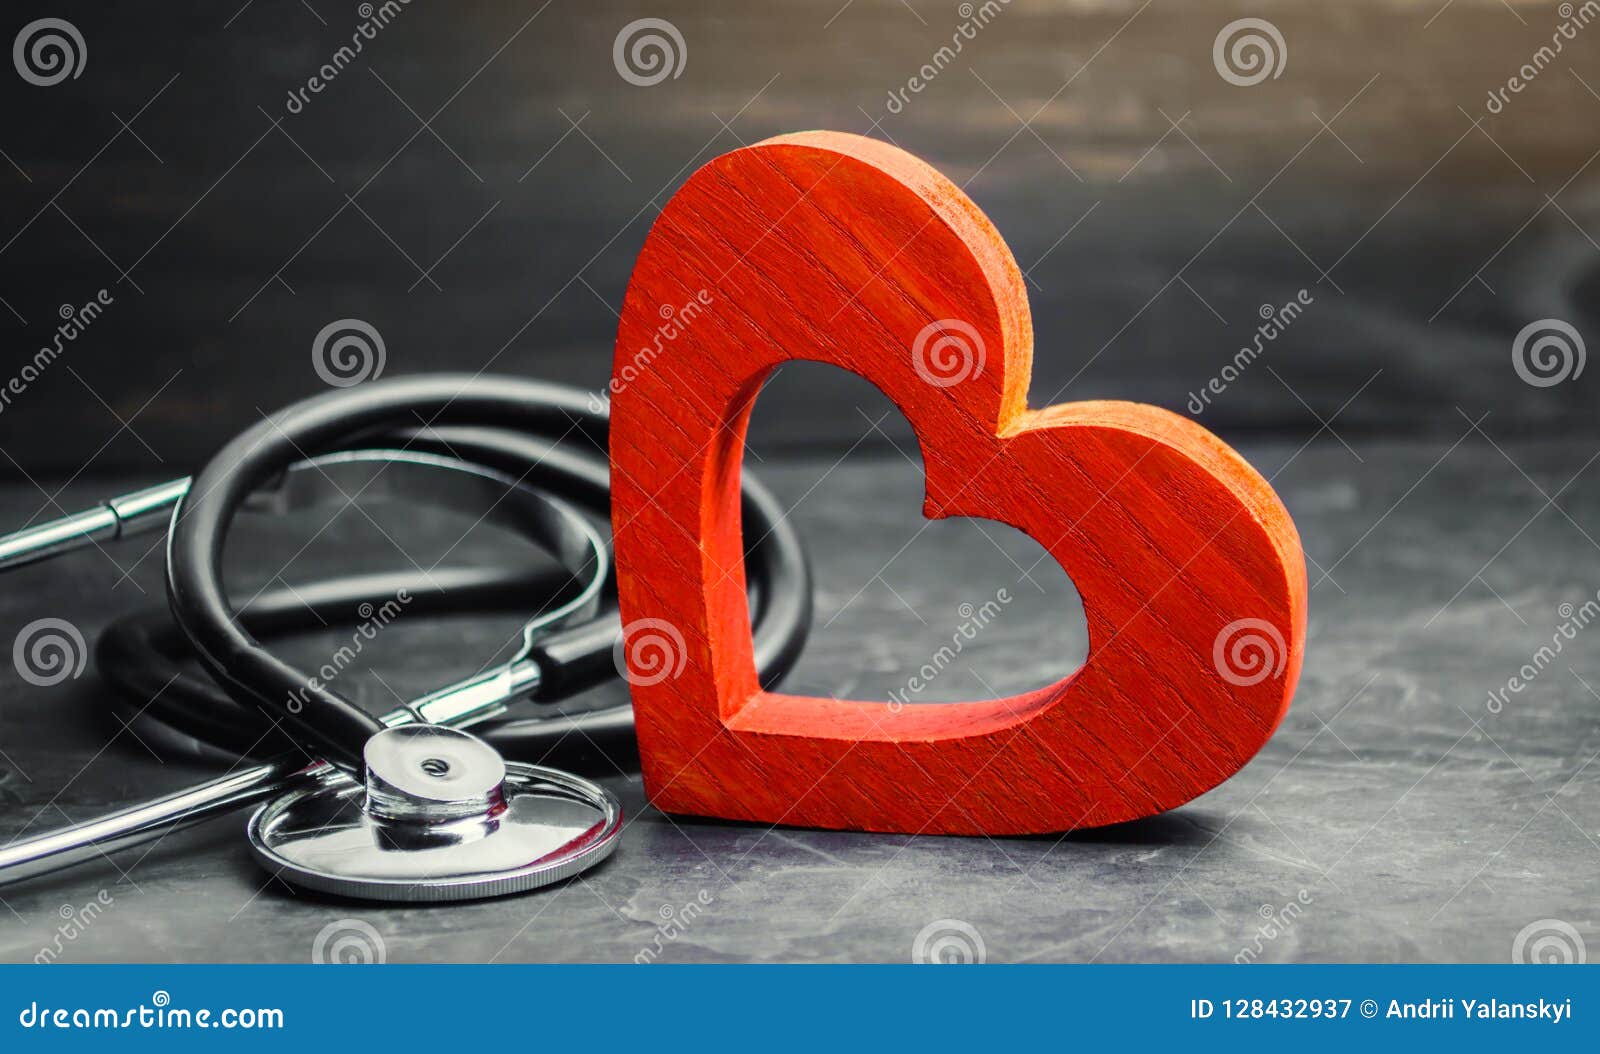 red heart and stethoscope. the concept of medicine and health insurance, family, life. ambulance. cardiology healthcare.